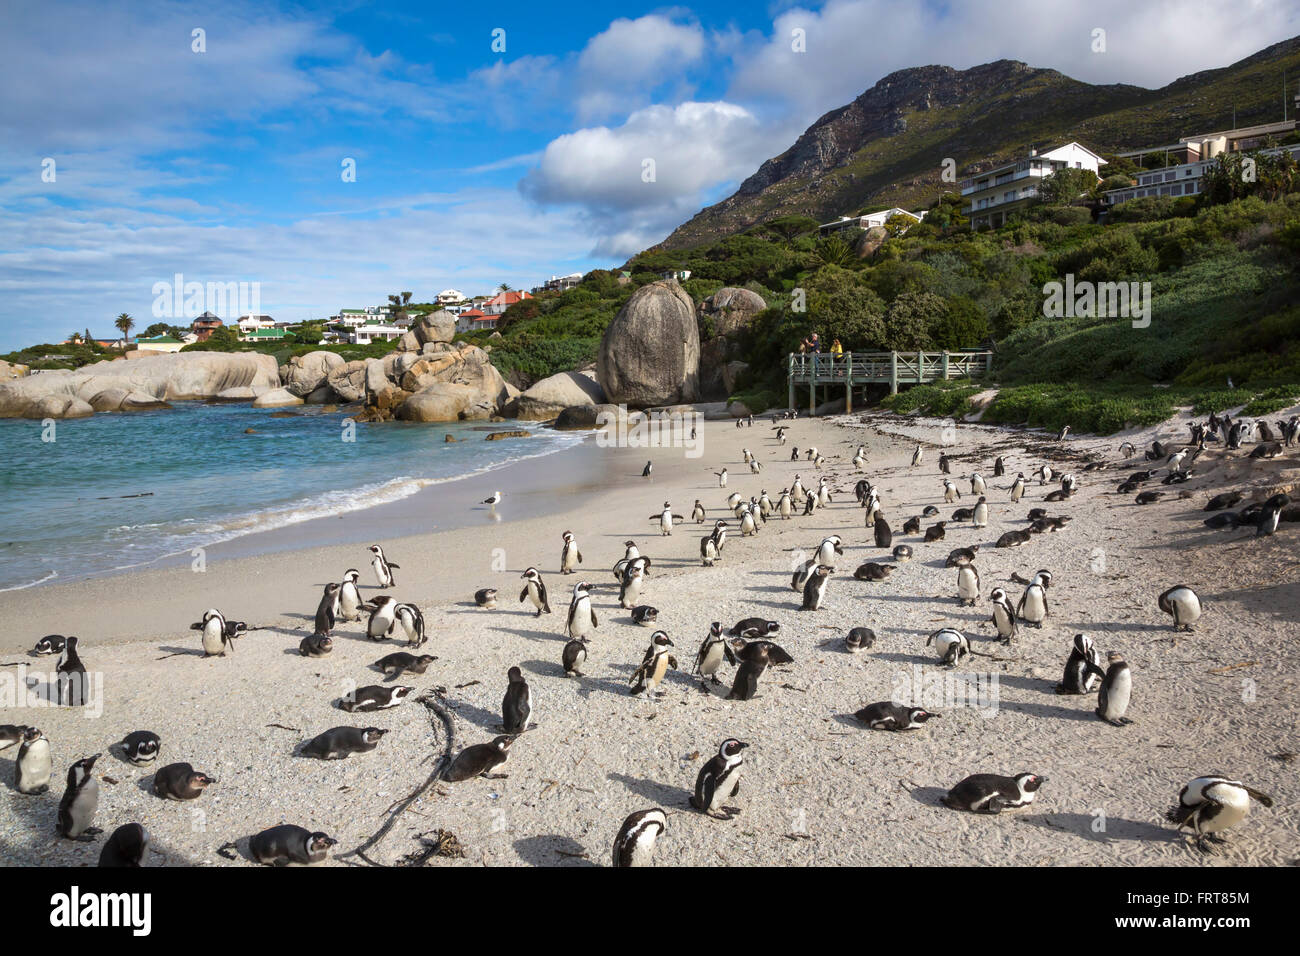 African penguins (Spheniscus demersus) colony on Foxy Beach, Table Mountain National Park, Simon's Town, Cape Town, South Africa Stock Photo